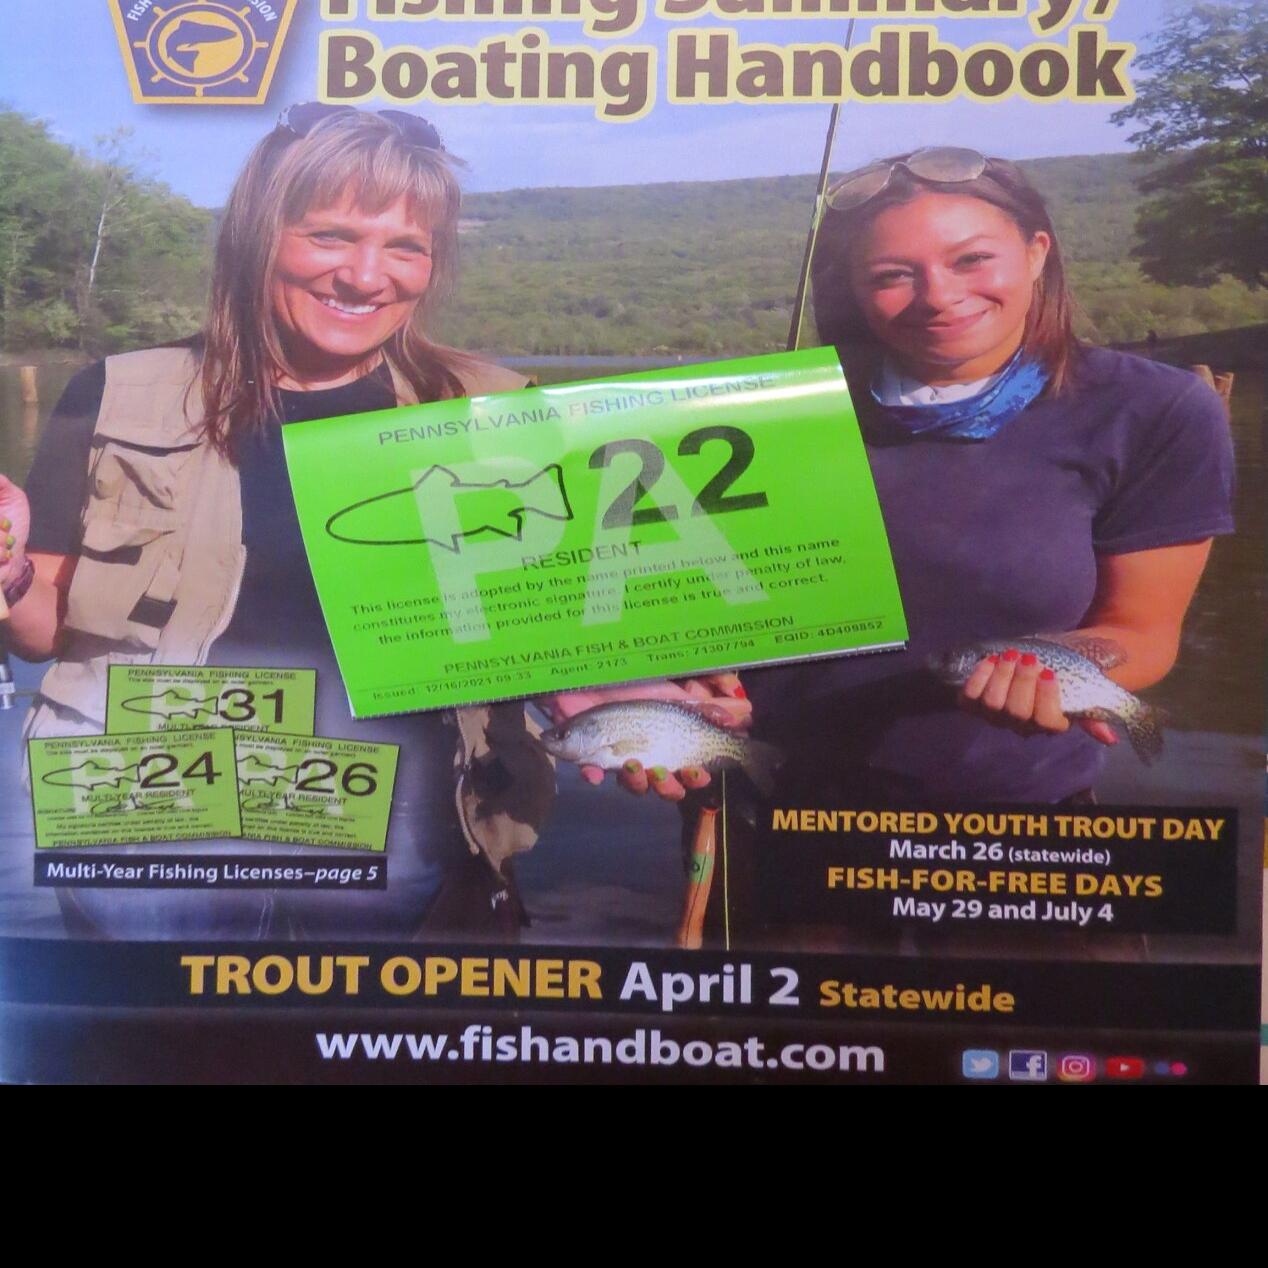 Fishing license is bargain of the year